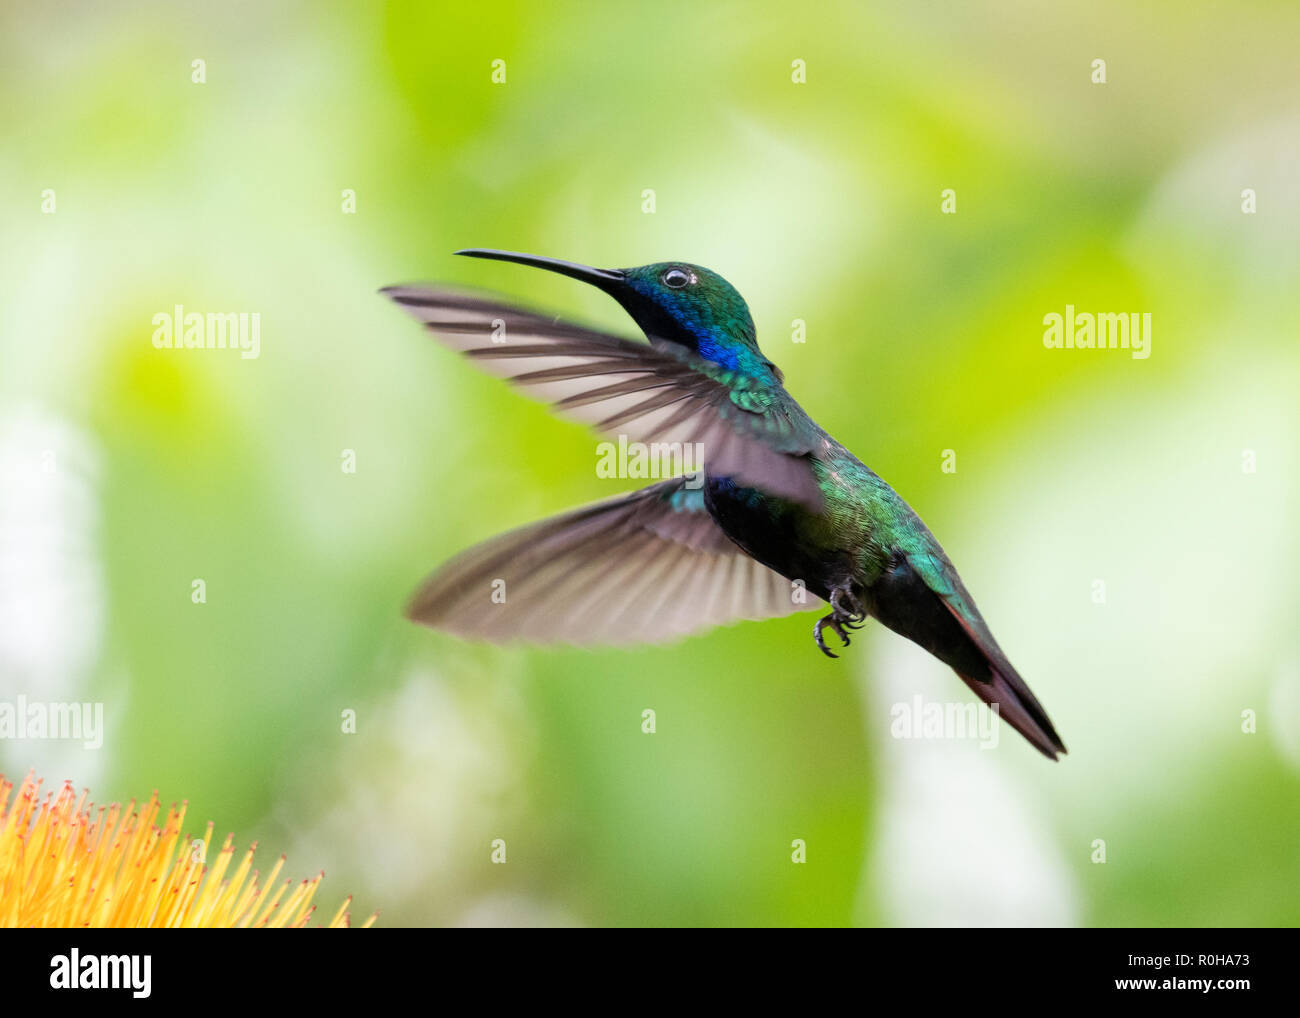 A Black-throated Mango hummingbird hovers in the air in a tropical garden. Stock Photo